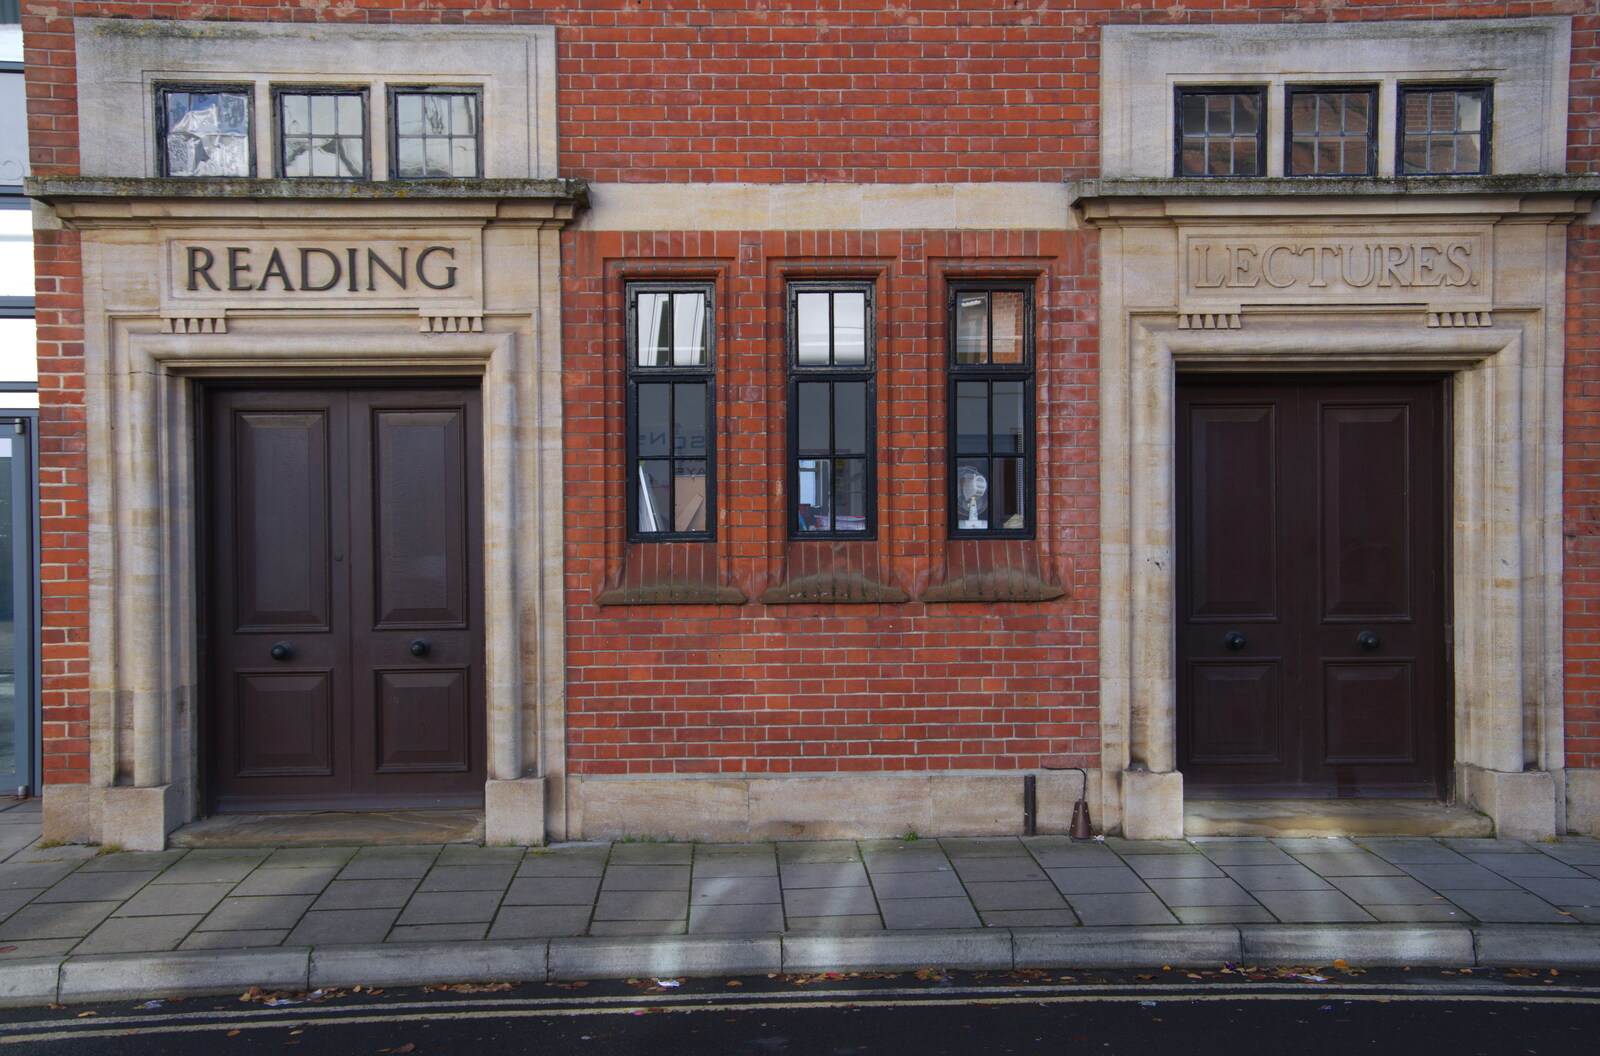 Seperate doors for reading and lectures from Exam Day Dereliction, Ipswich, Suffolk - 13th November 2019